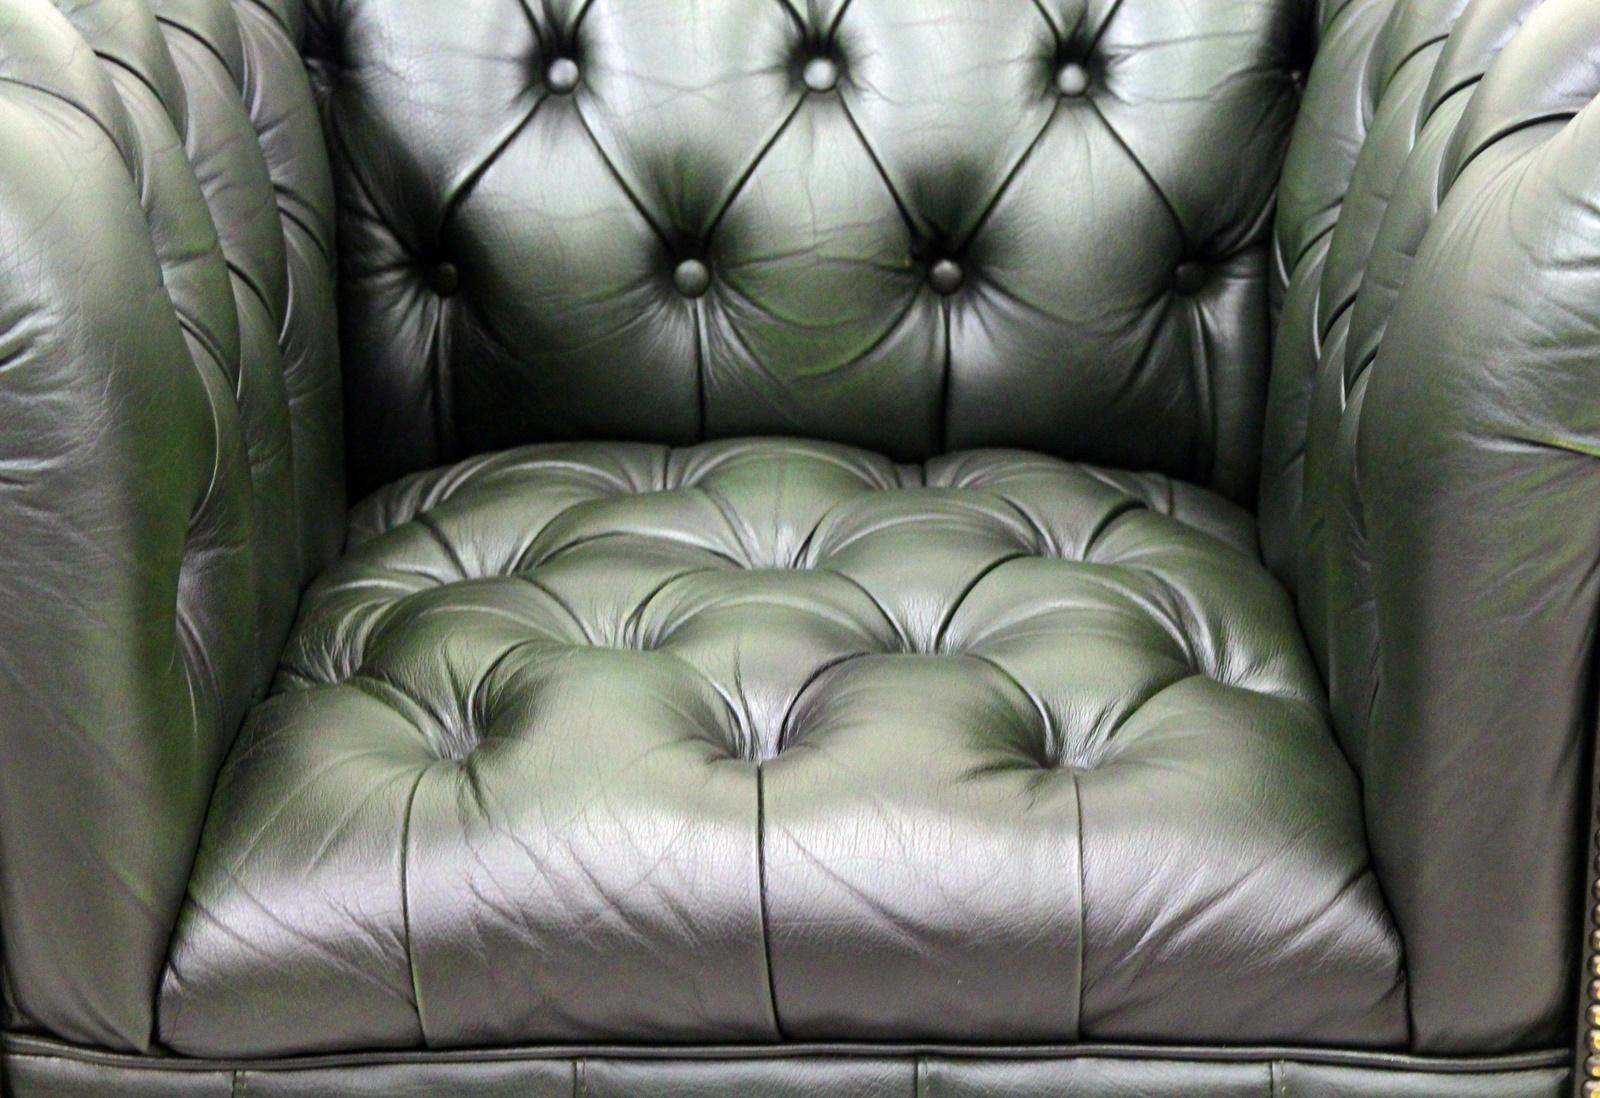 Chesterfield (Mint)
armchair
Measures: Height 74 cm, width 100 cm, depth 85 cm
Condition: The armchair is in good condition for the age and still has the charm of the 